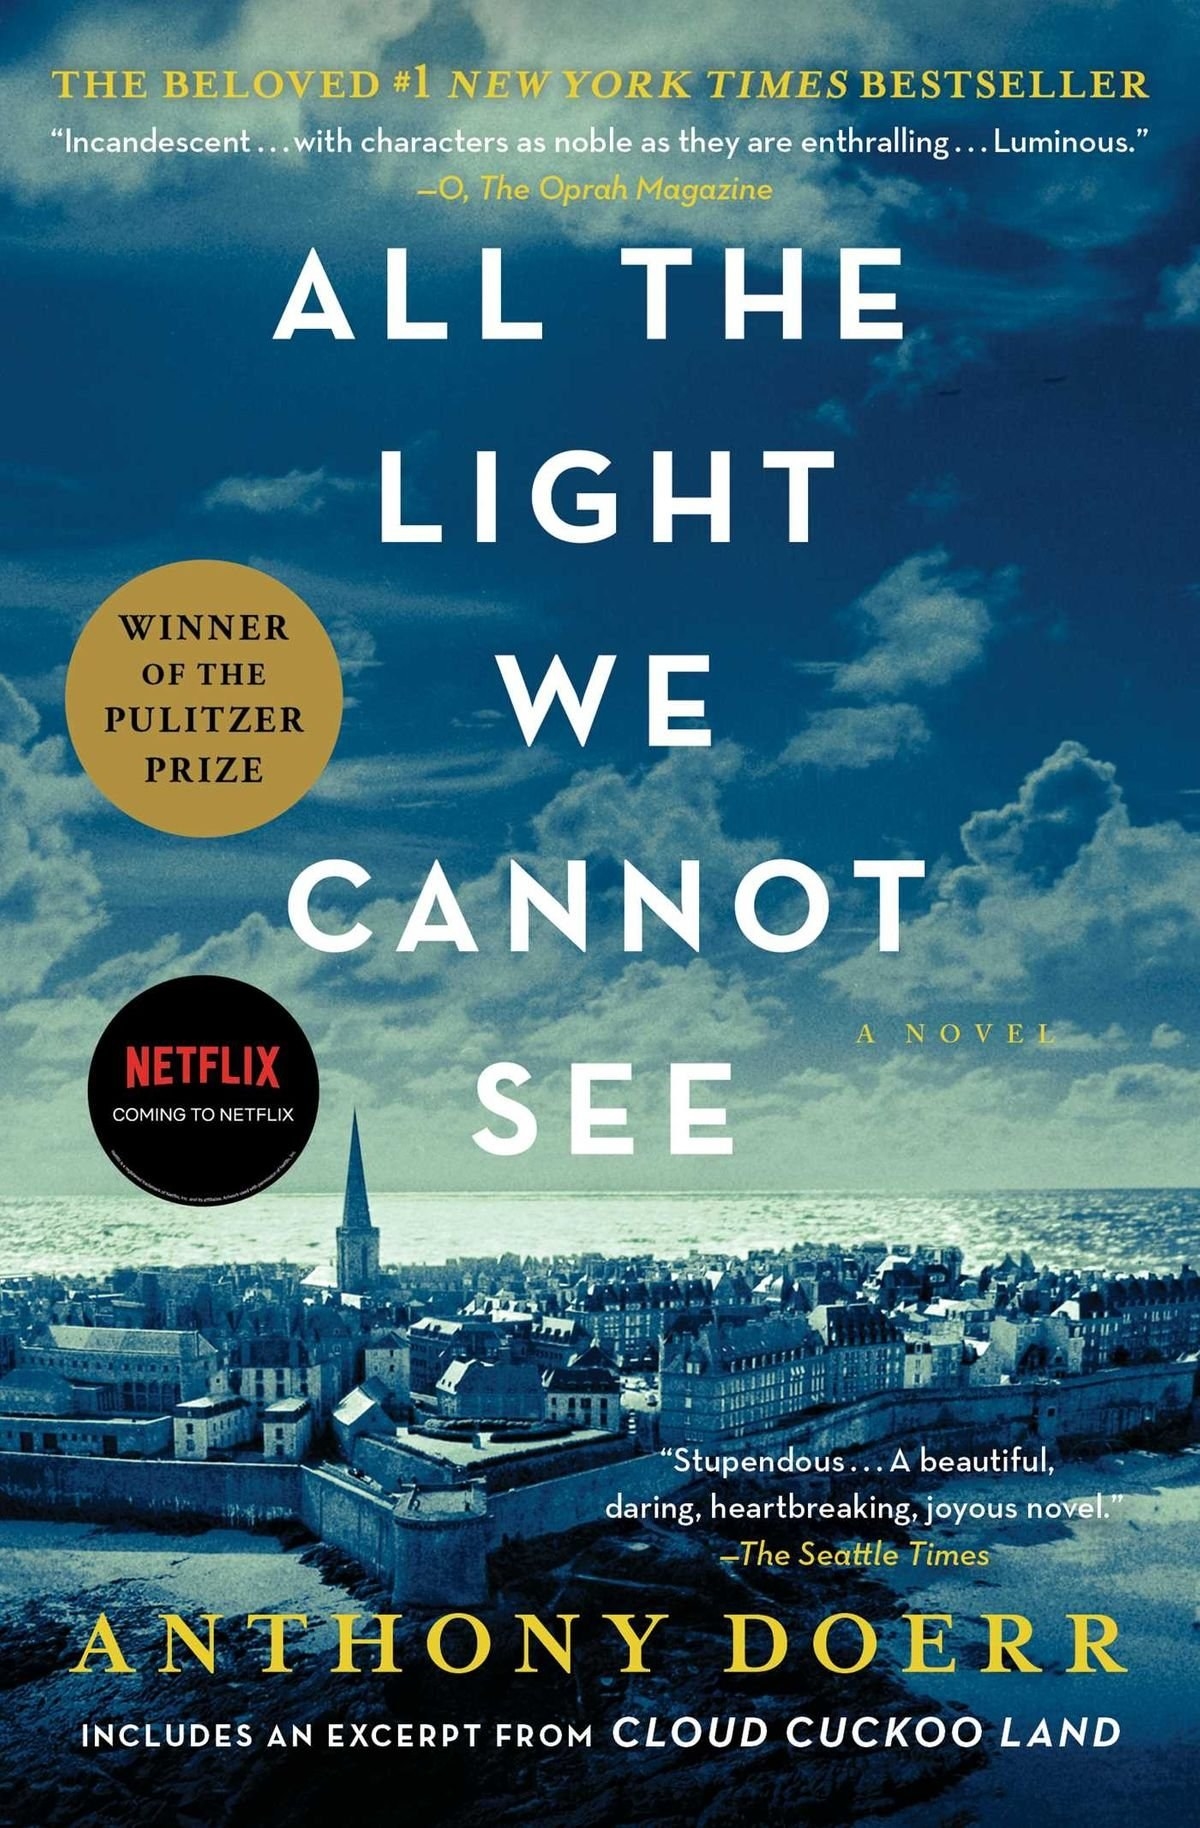 &quot;All The Light We Cannot See&quot; by Anthony Doerr.